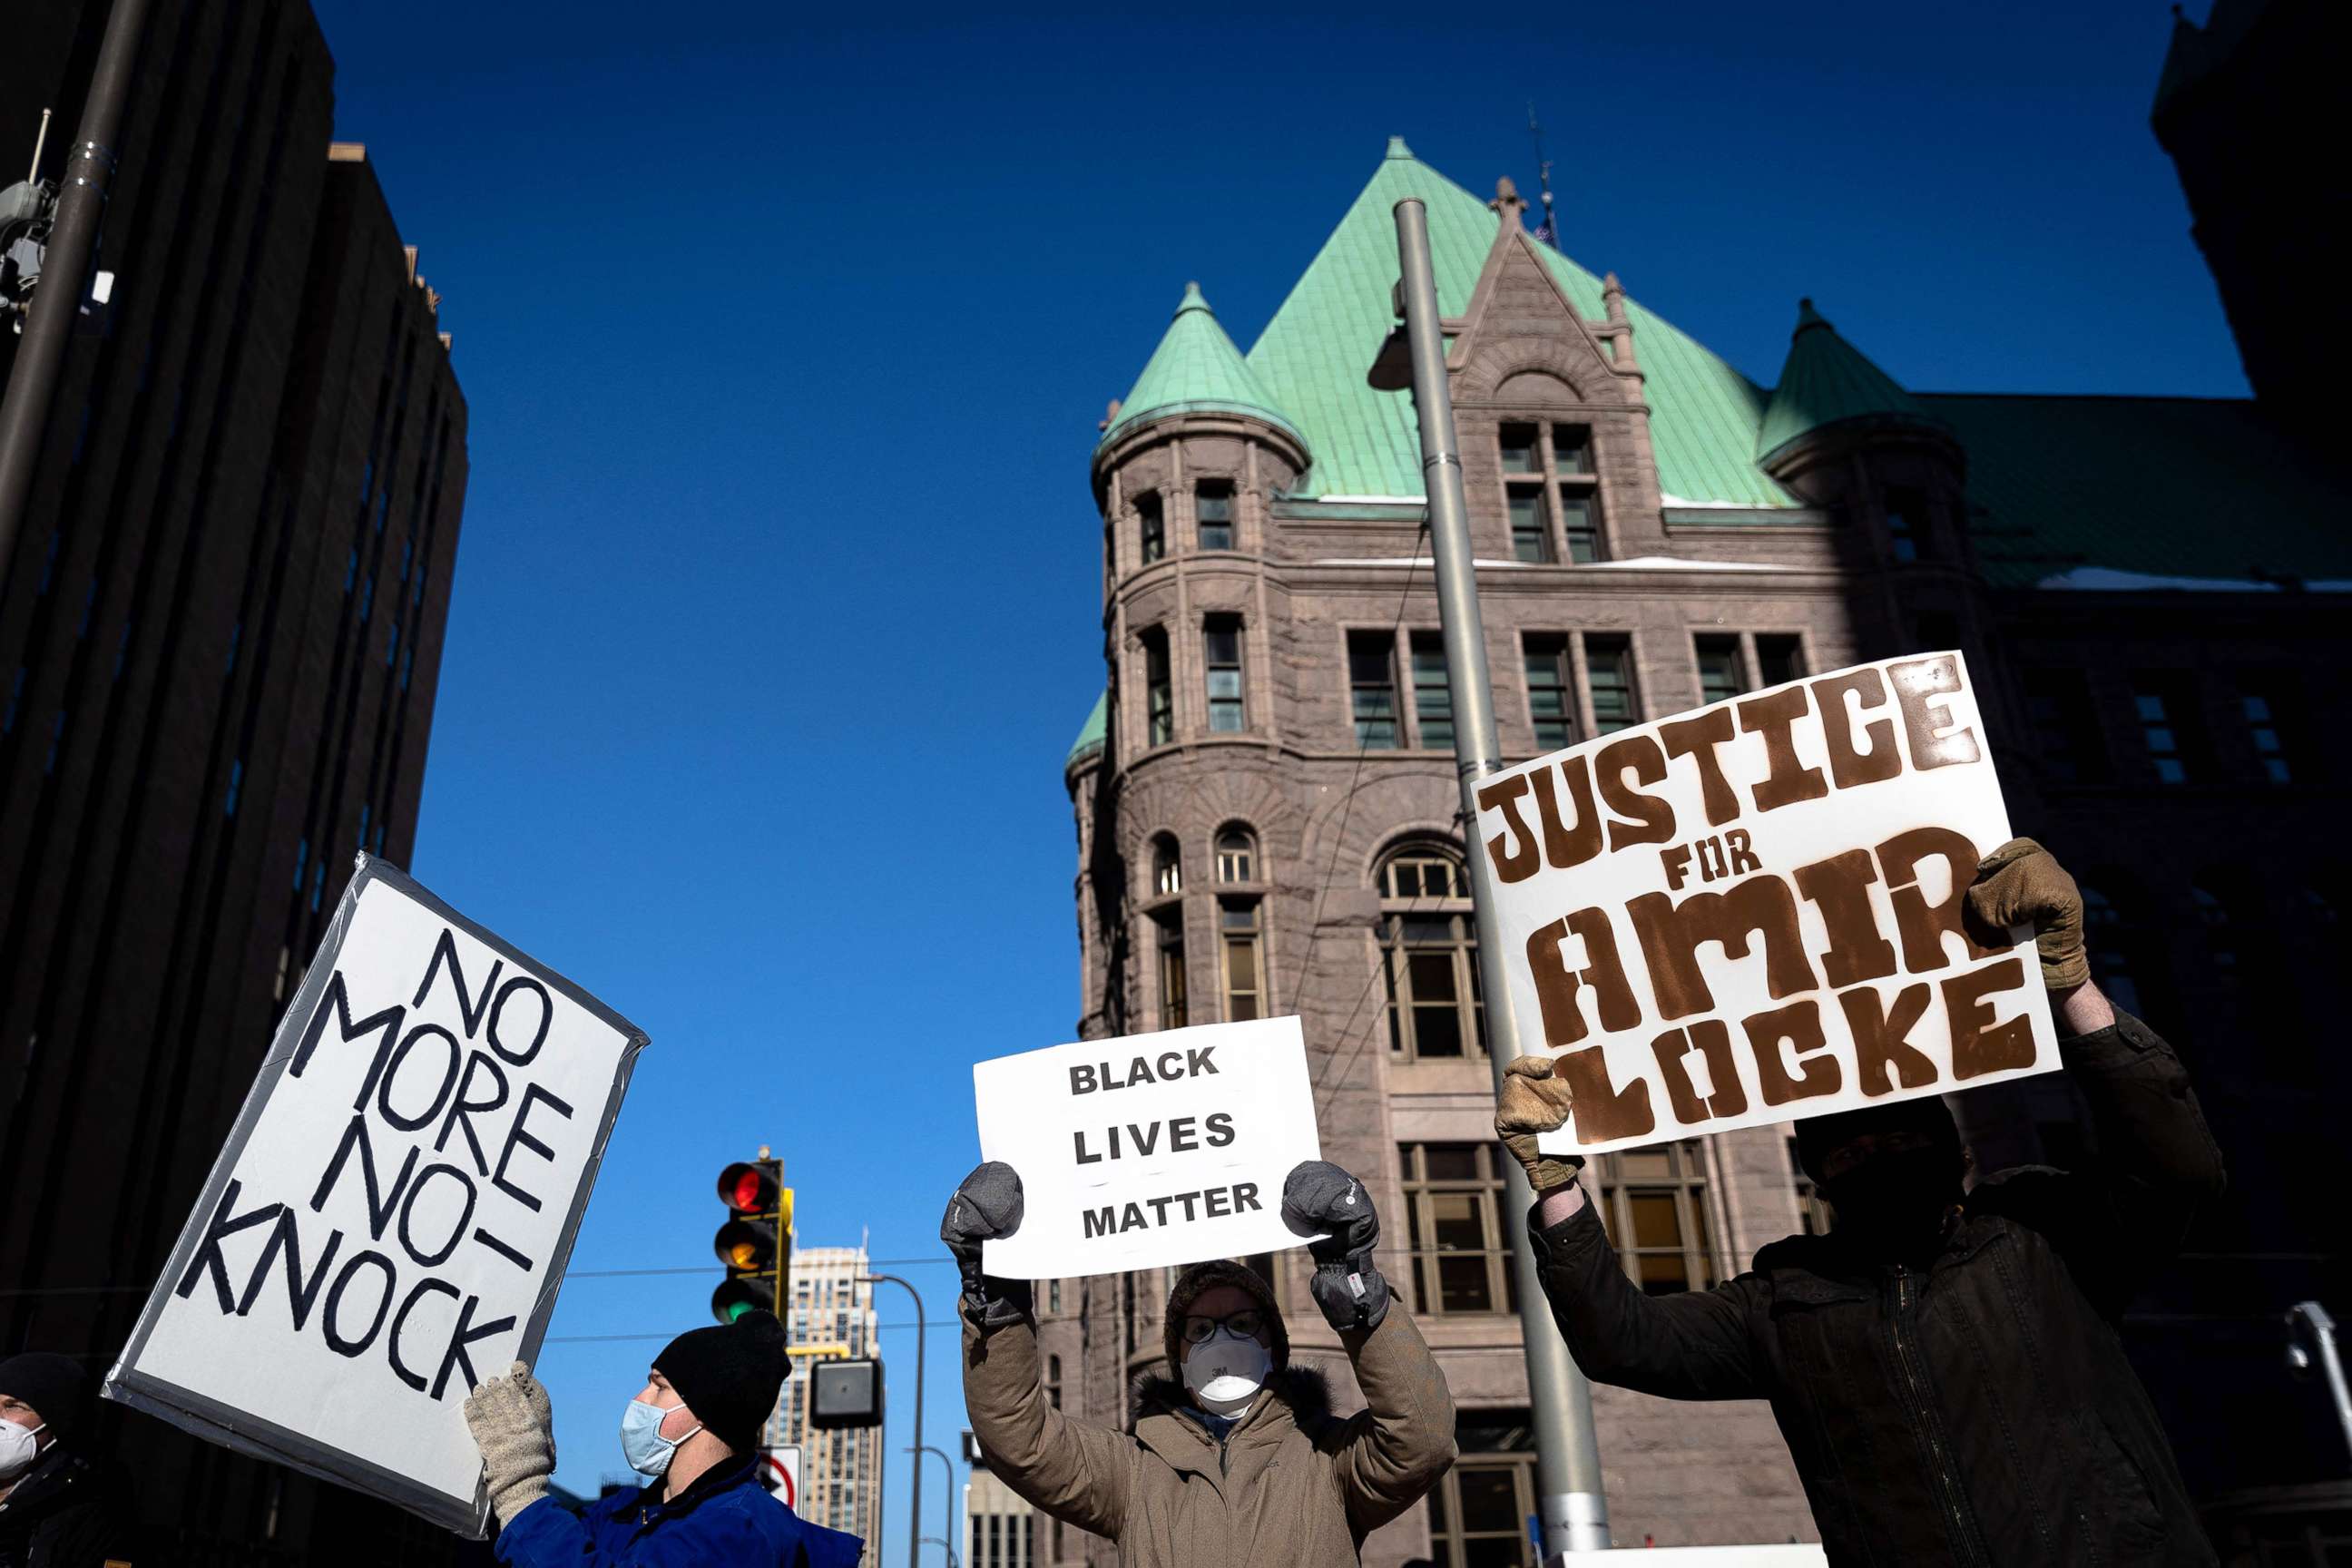 PHOTO: Demonstrators hold signs at a protest over the killing of Amir Locke during a no-knock warrant, outside the Hennepin County Government Center in Minneapolis, Feb. 5, 2022.